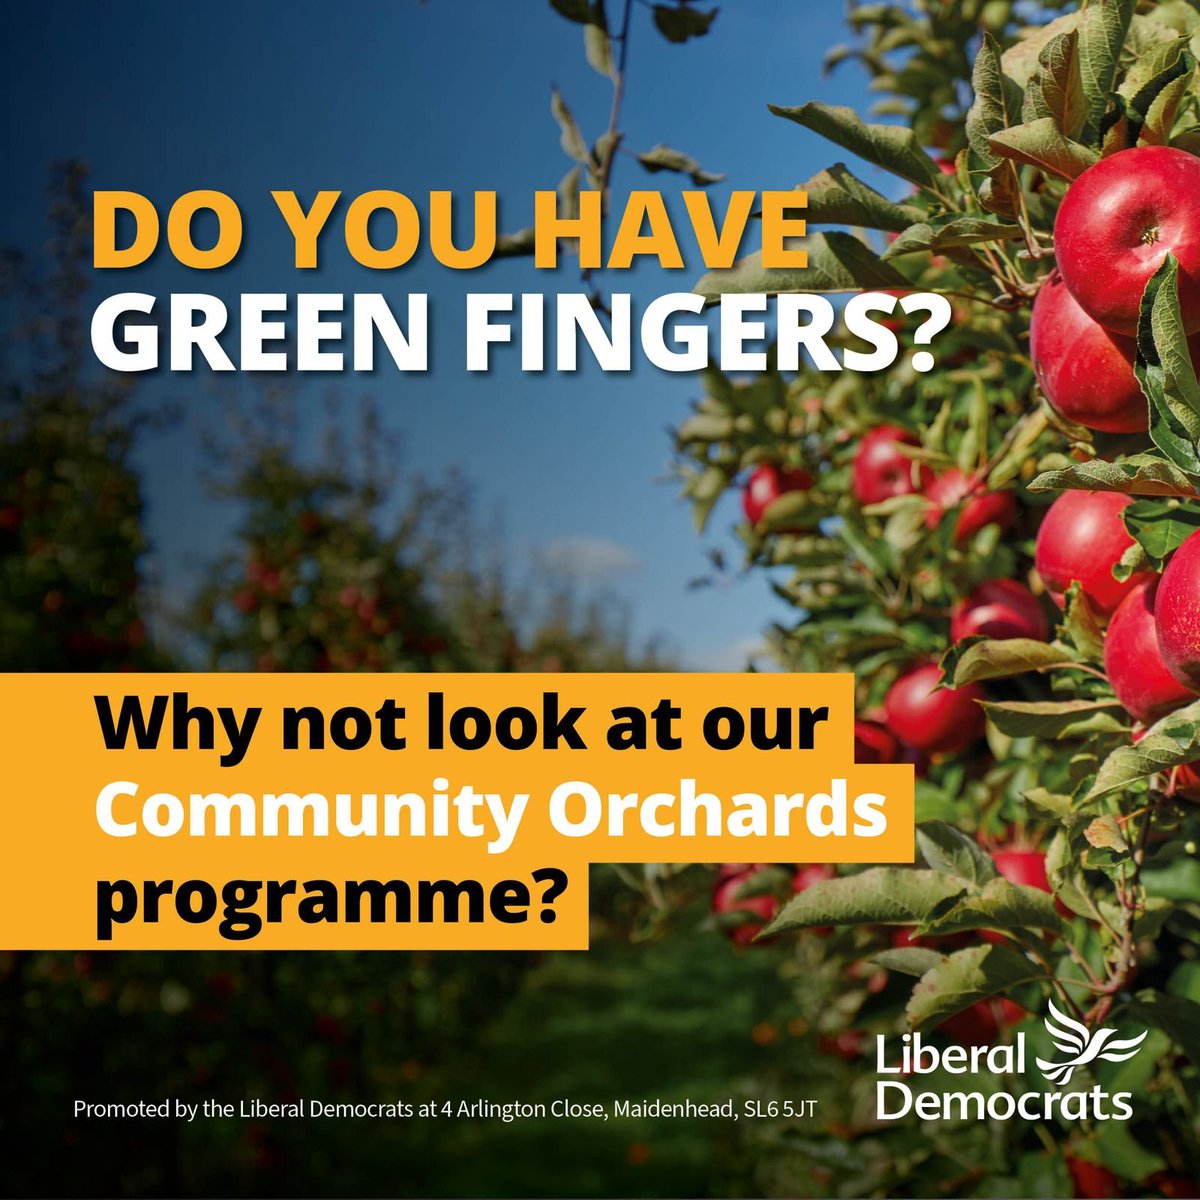 🌳 RBWM has secured funding for new community orchards. This programme will not only support our climate change and biodiversity ambitions but is a fantastic way to get involved in your local community. Applications are open now. To apply, please visit rbwmtogether.rbwm.gov.uk/orchards